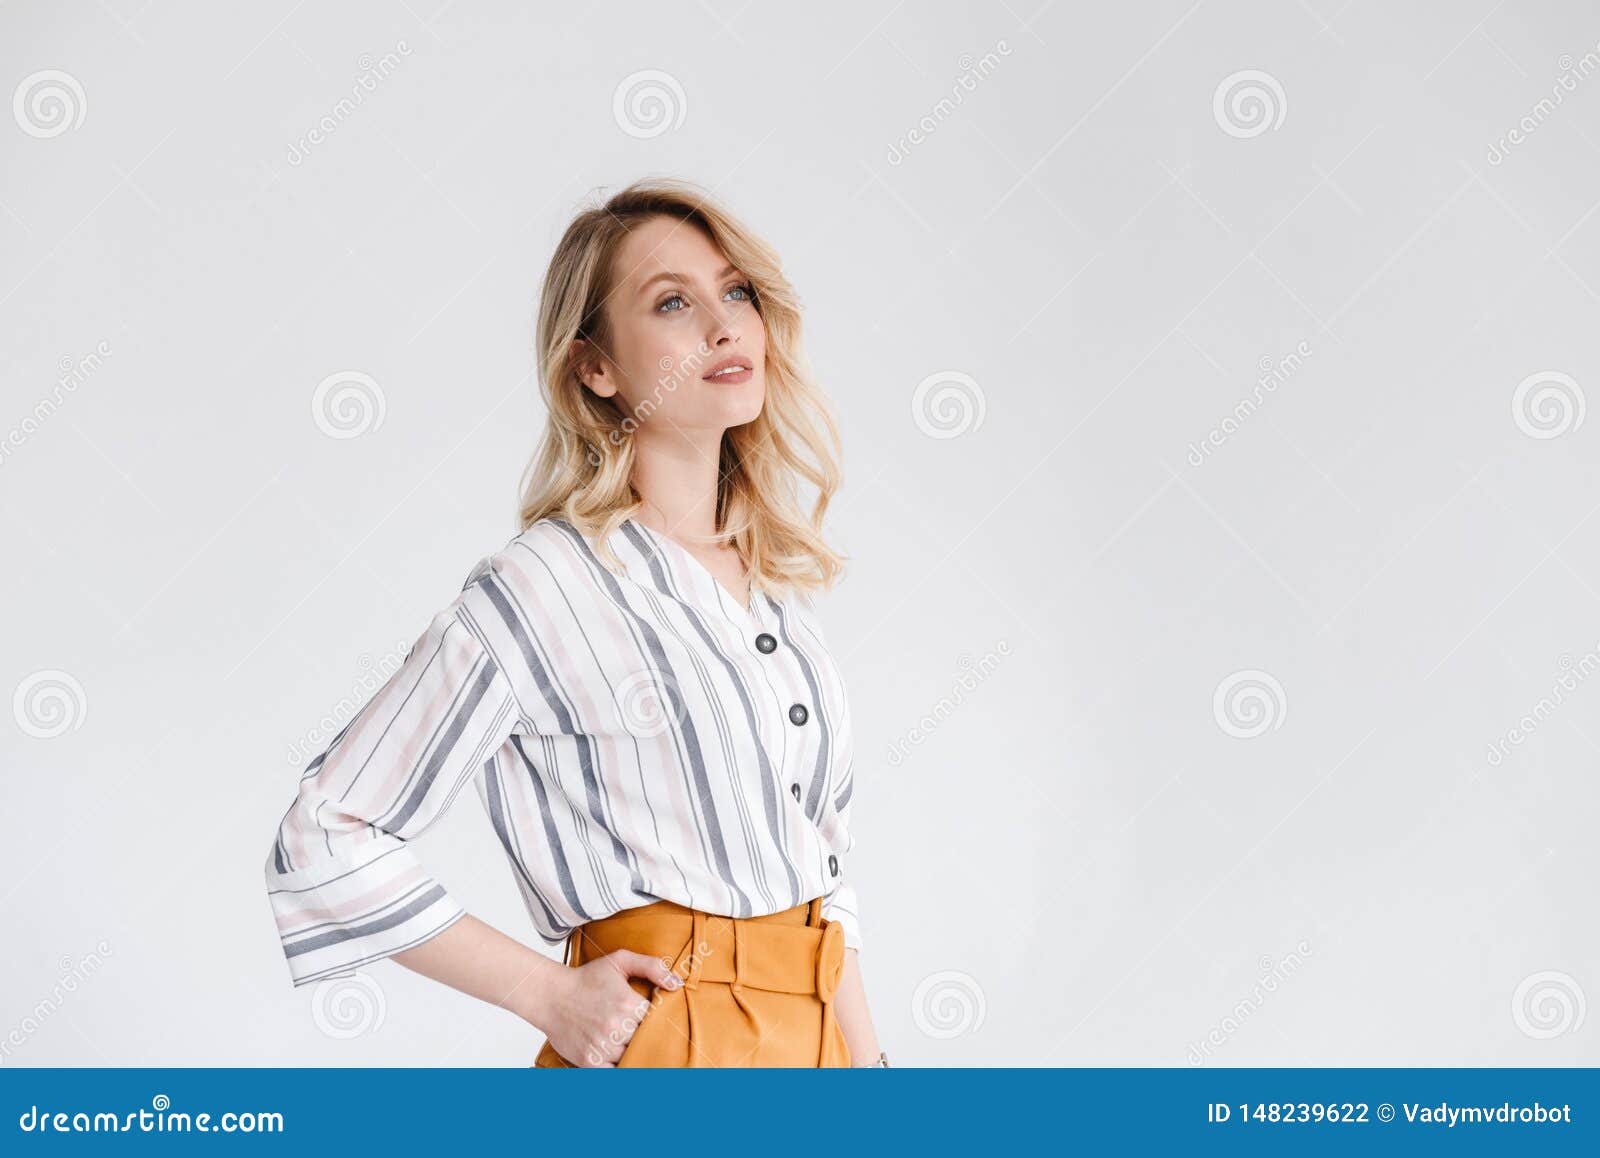 Half Turn Portrait of Young Nice Woman Wearing Casual Clothes Looking ...